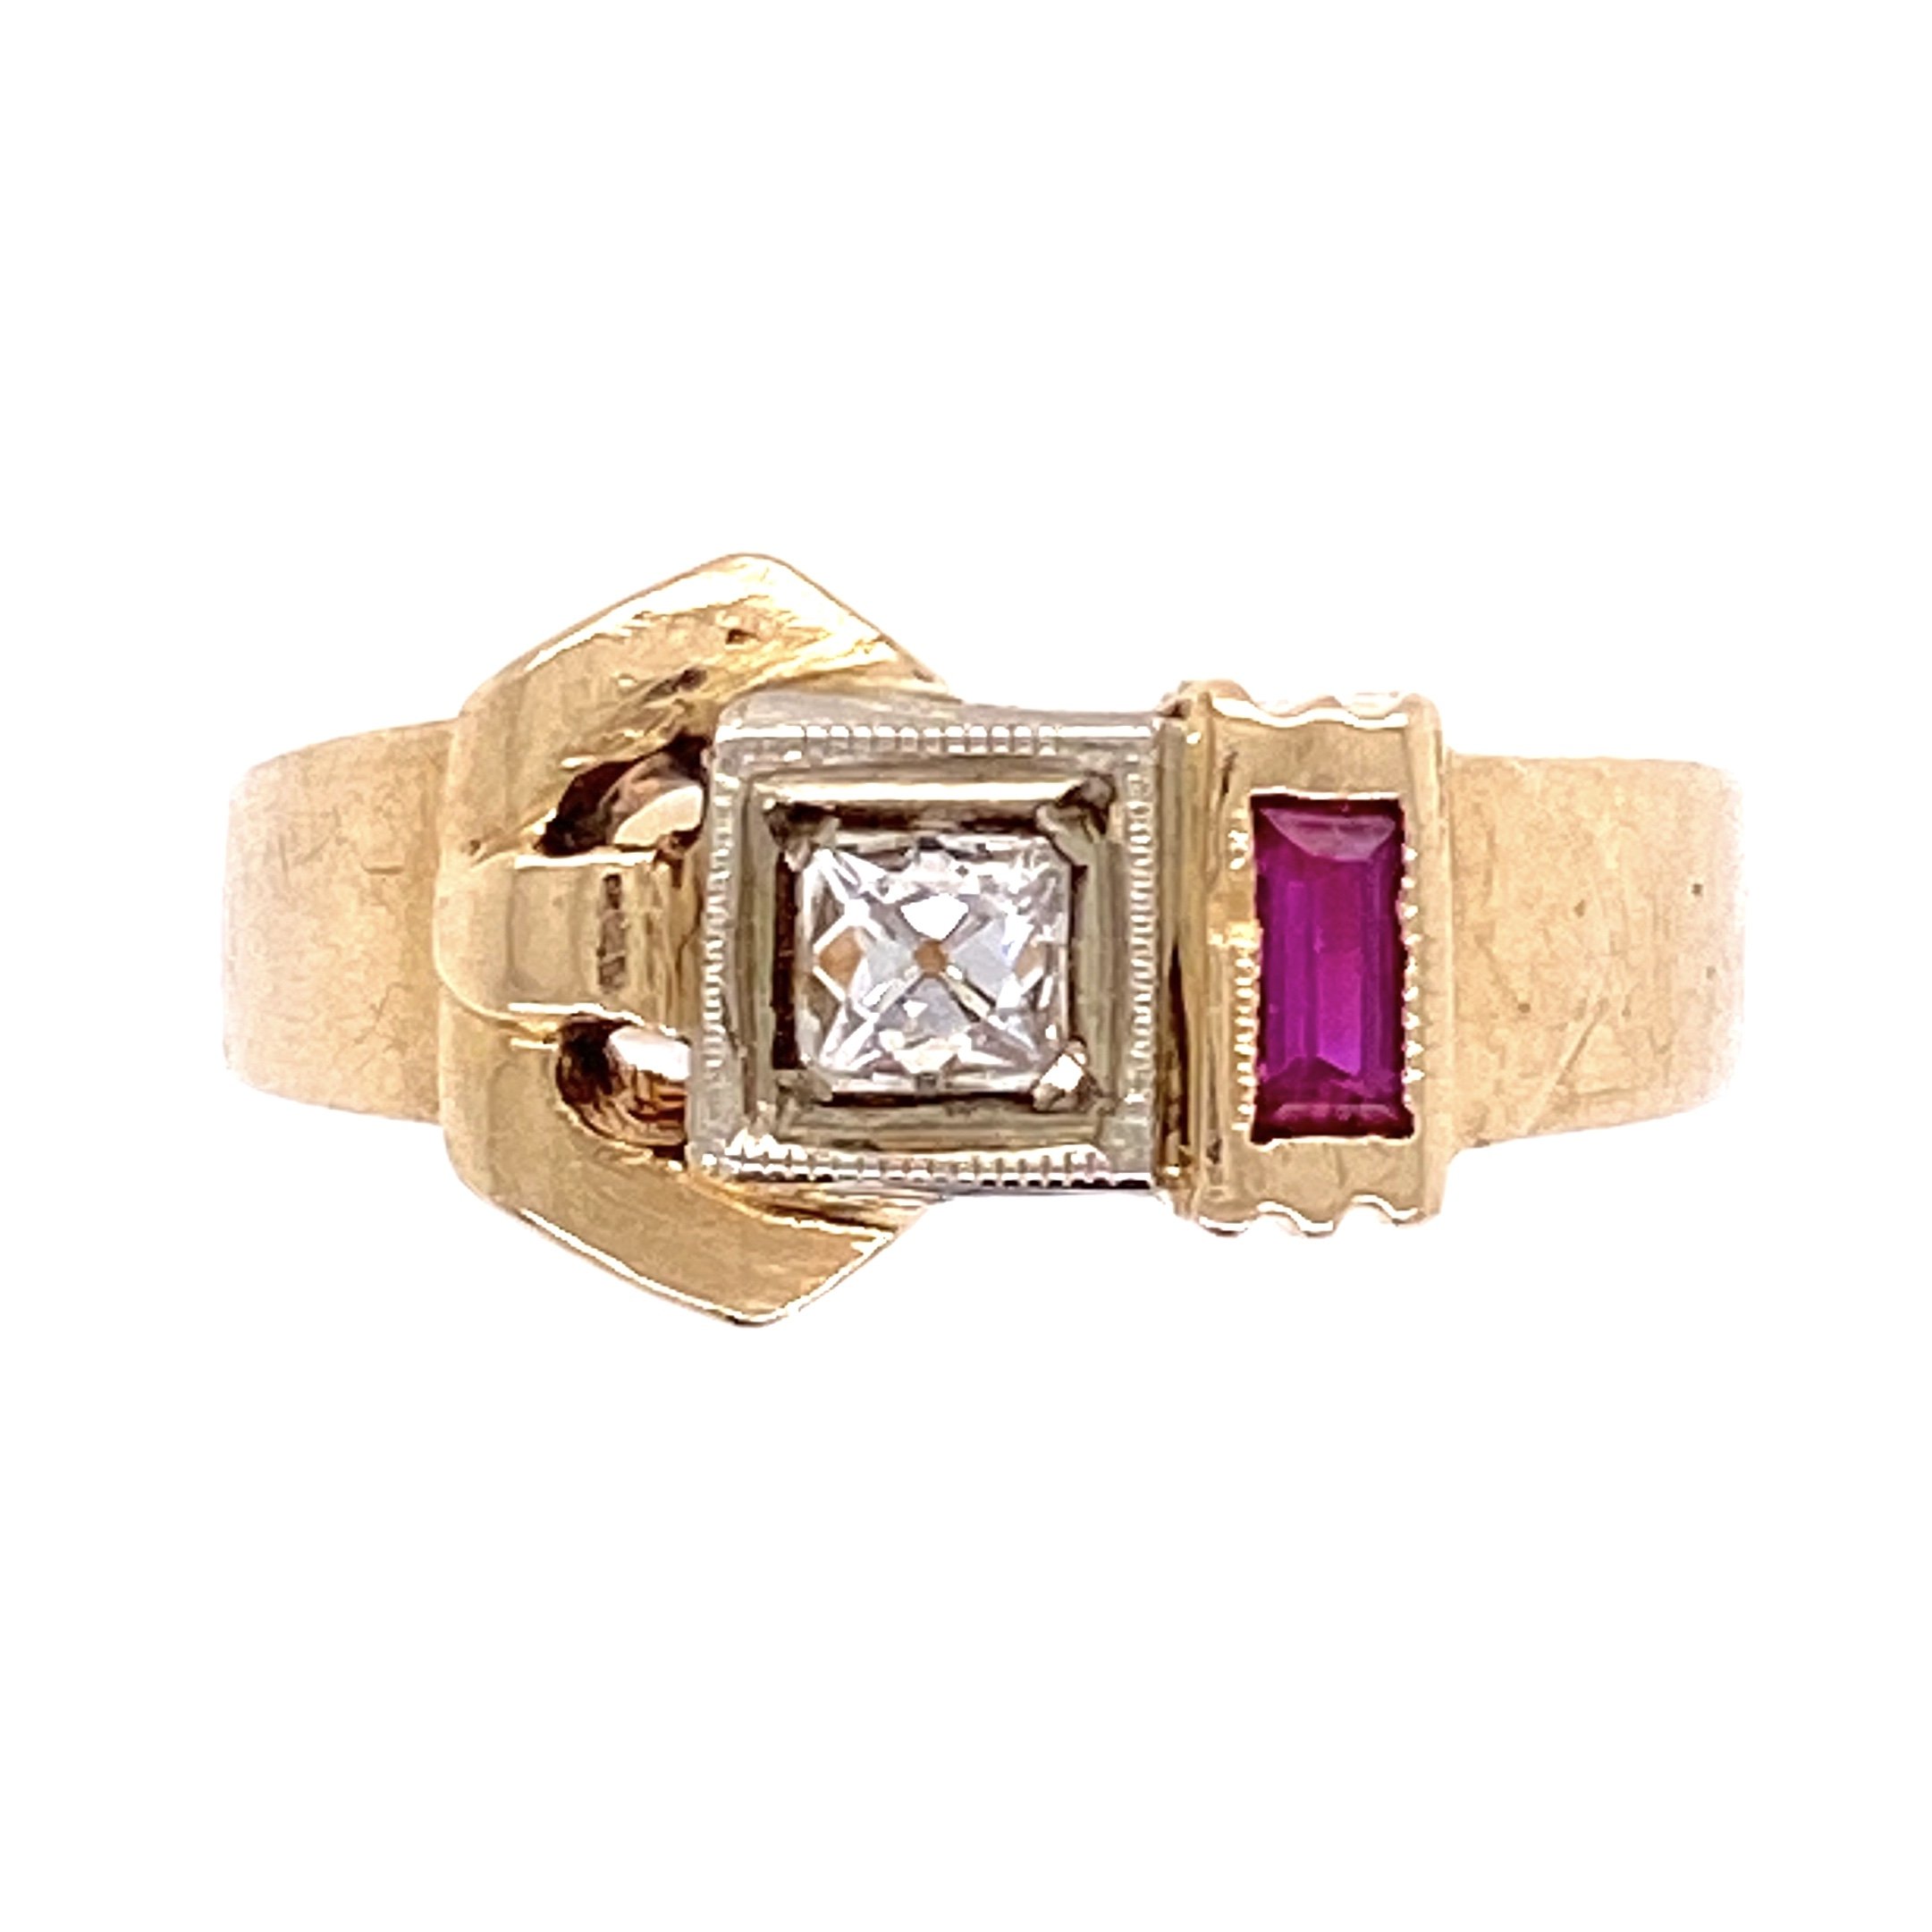 14K Rose Gold Retro Ring c1940's .10ct French Cut Diamond w/synthetic Rubies